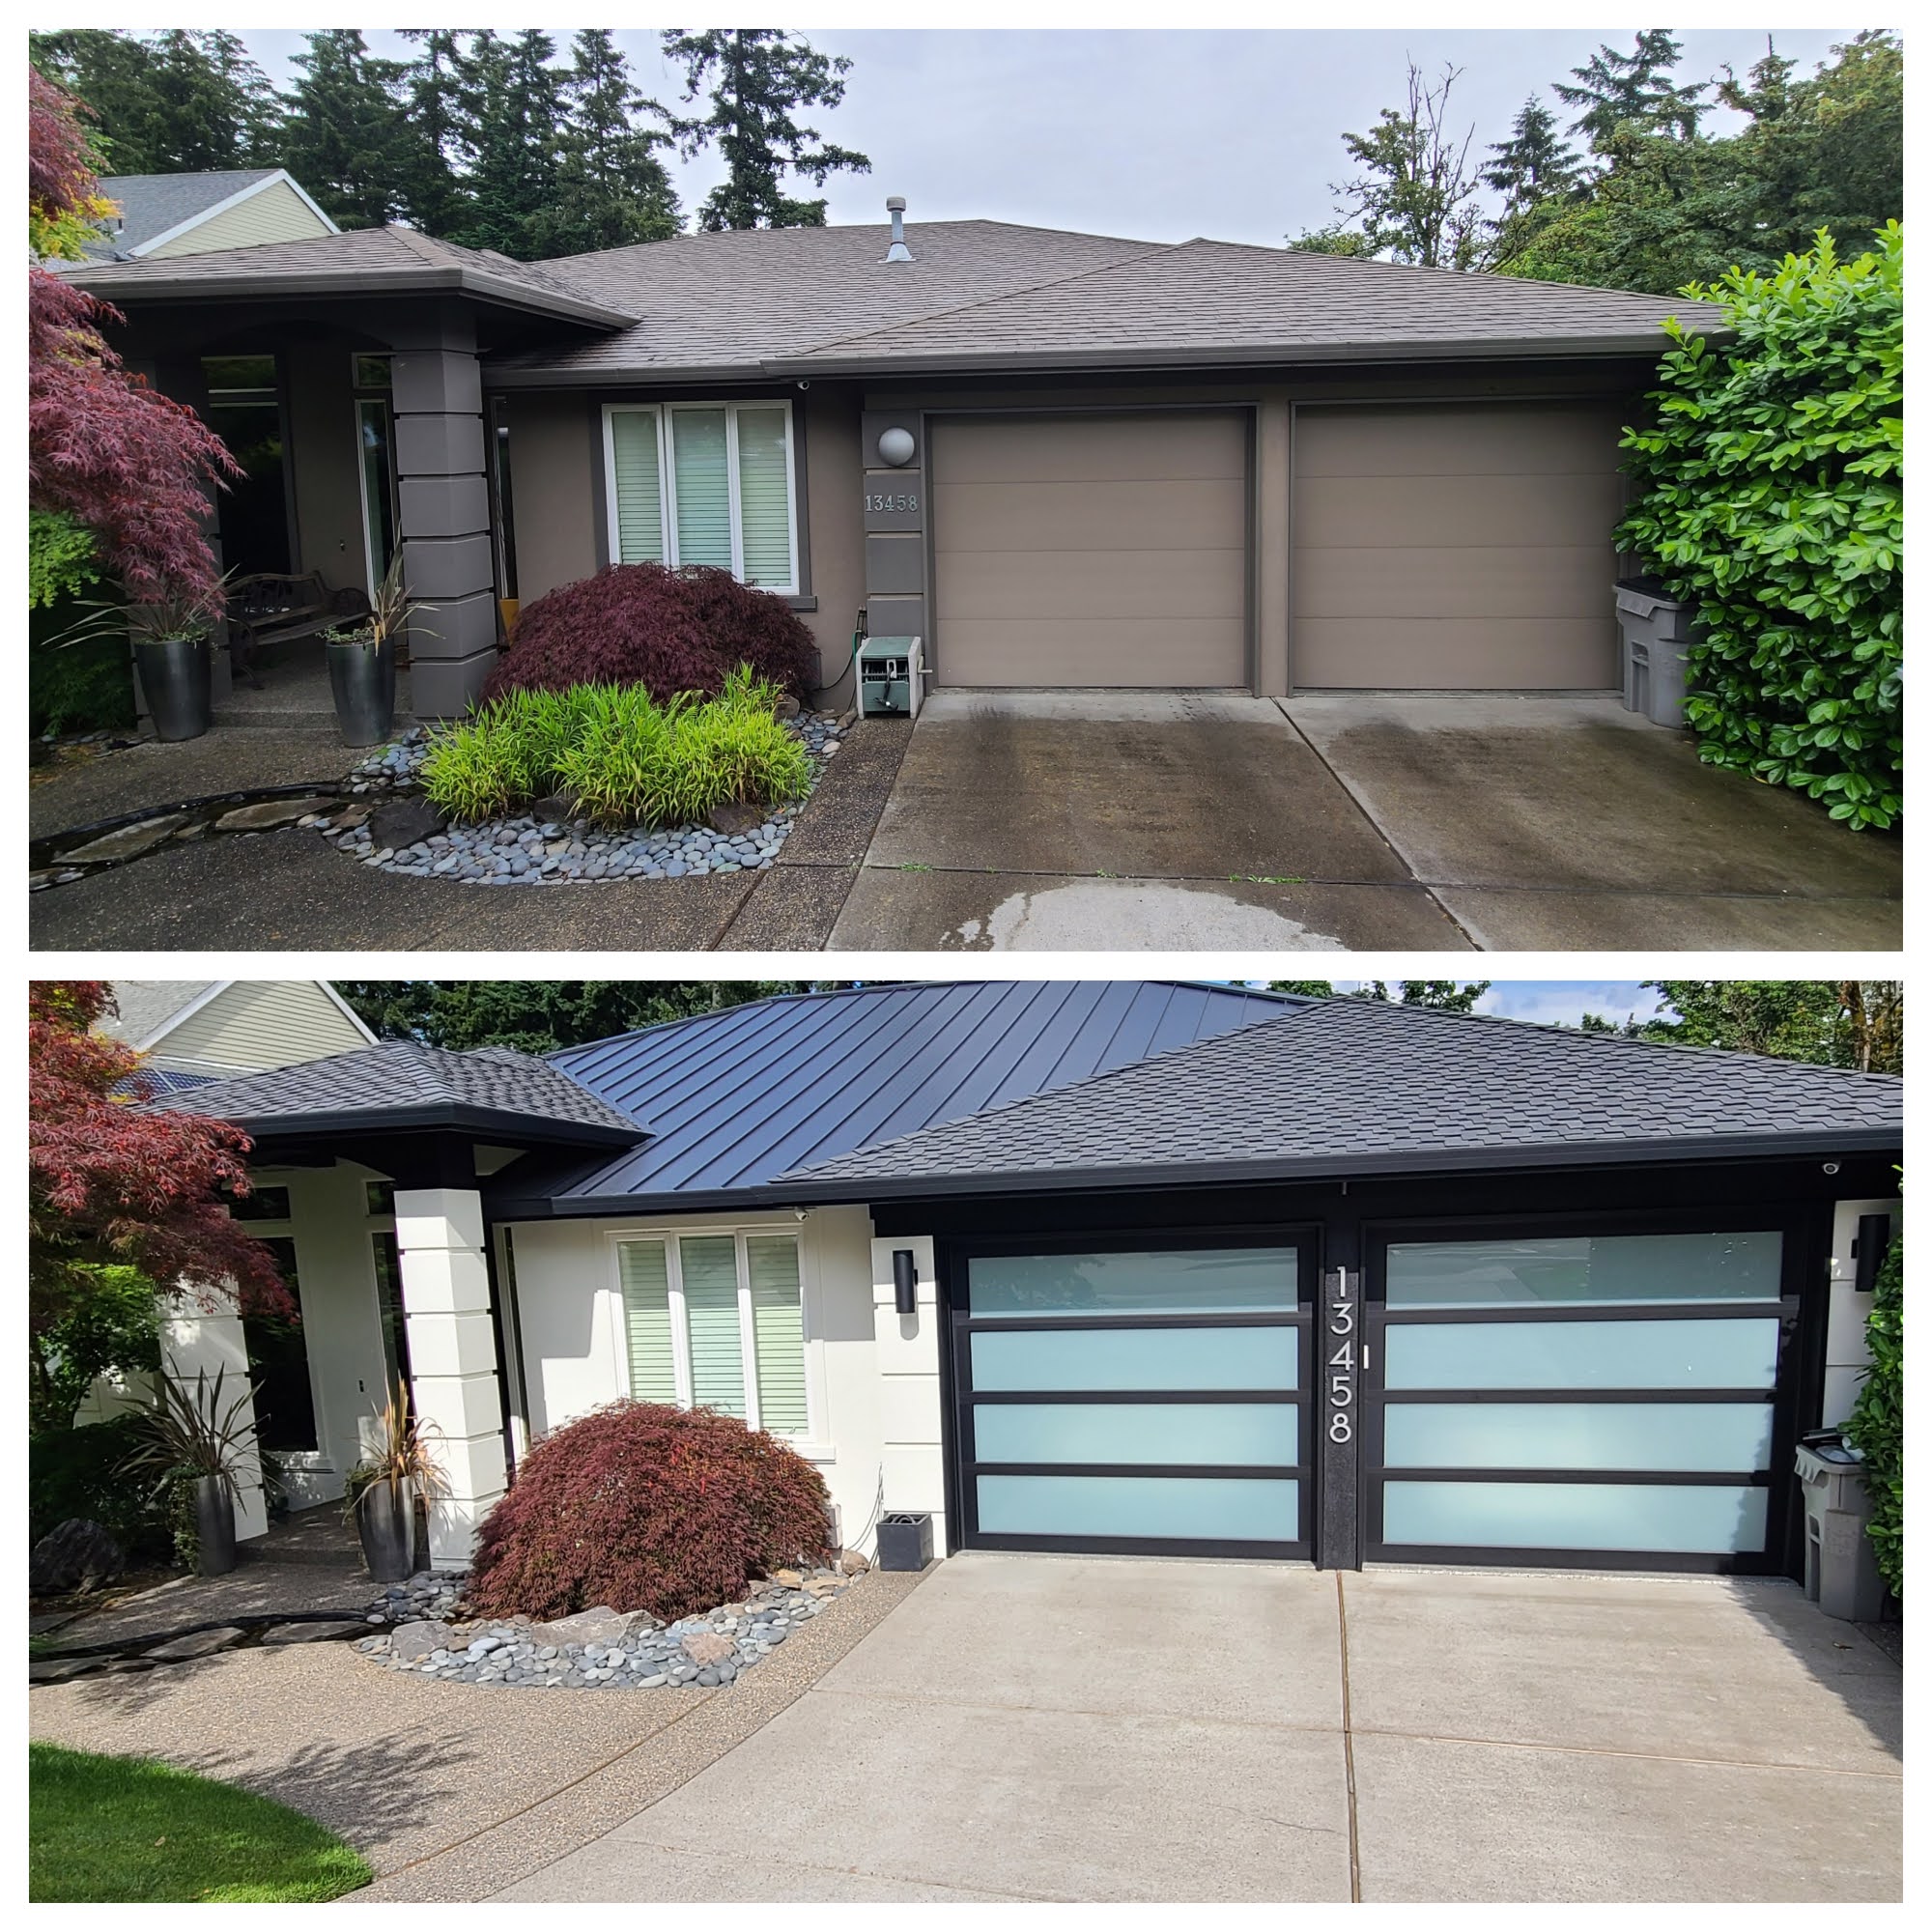 Before and after photos of single story home painted in Beaverton